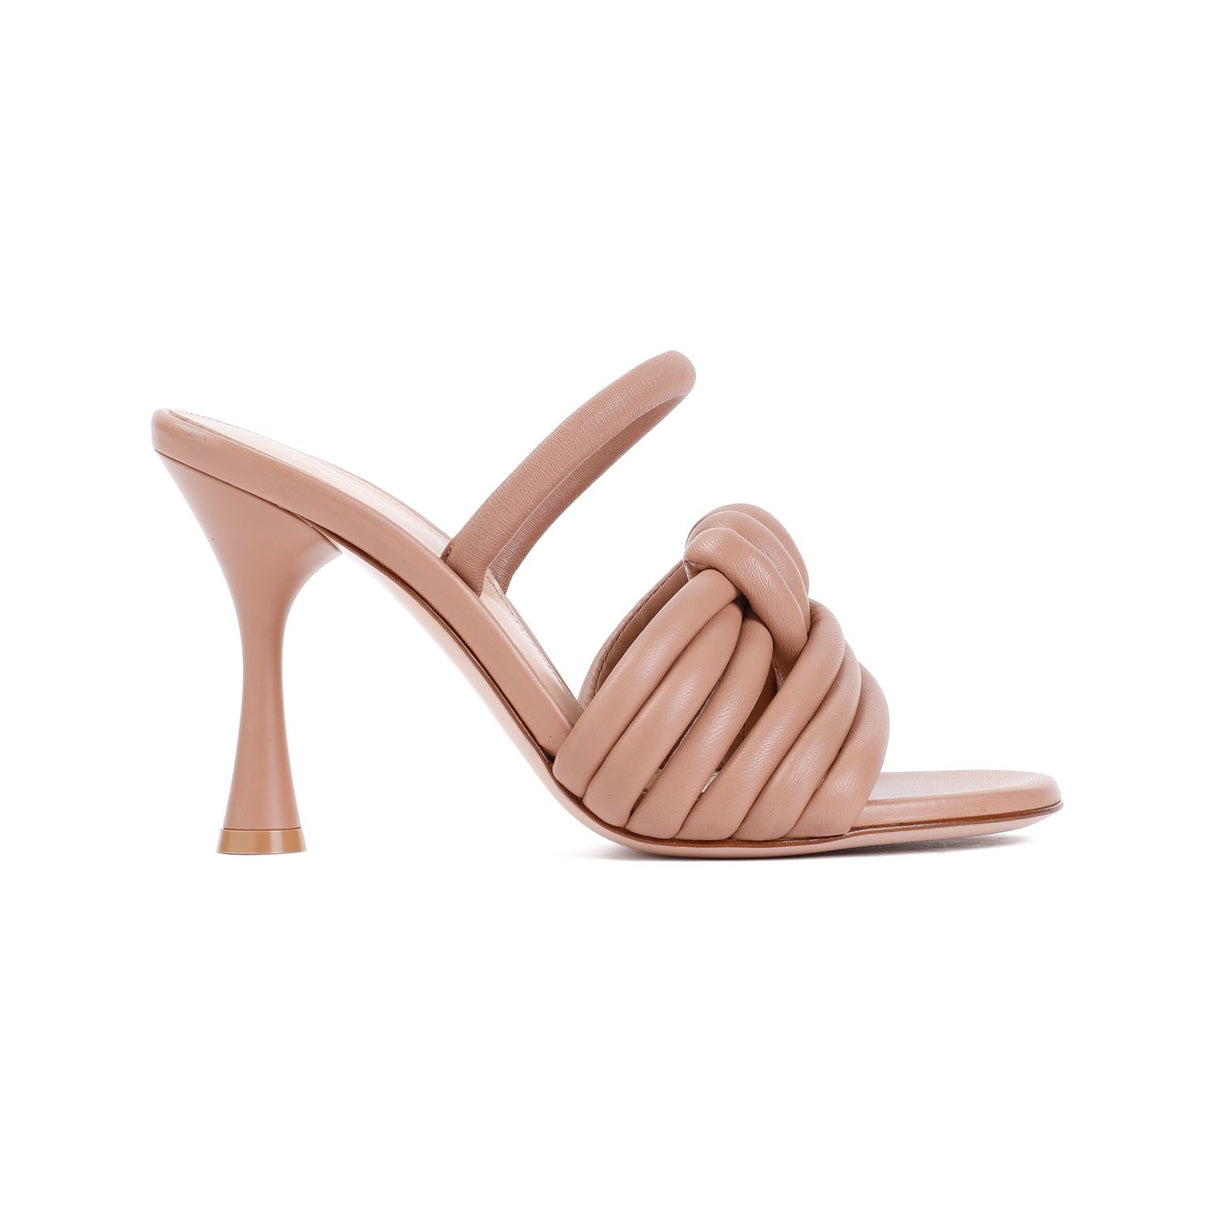 Nude Nappa Leather Sandals with 9.5cm Heel for Women